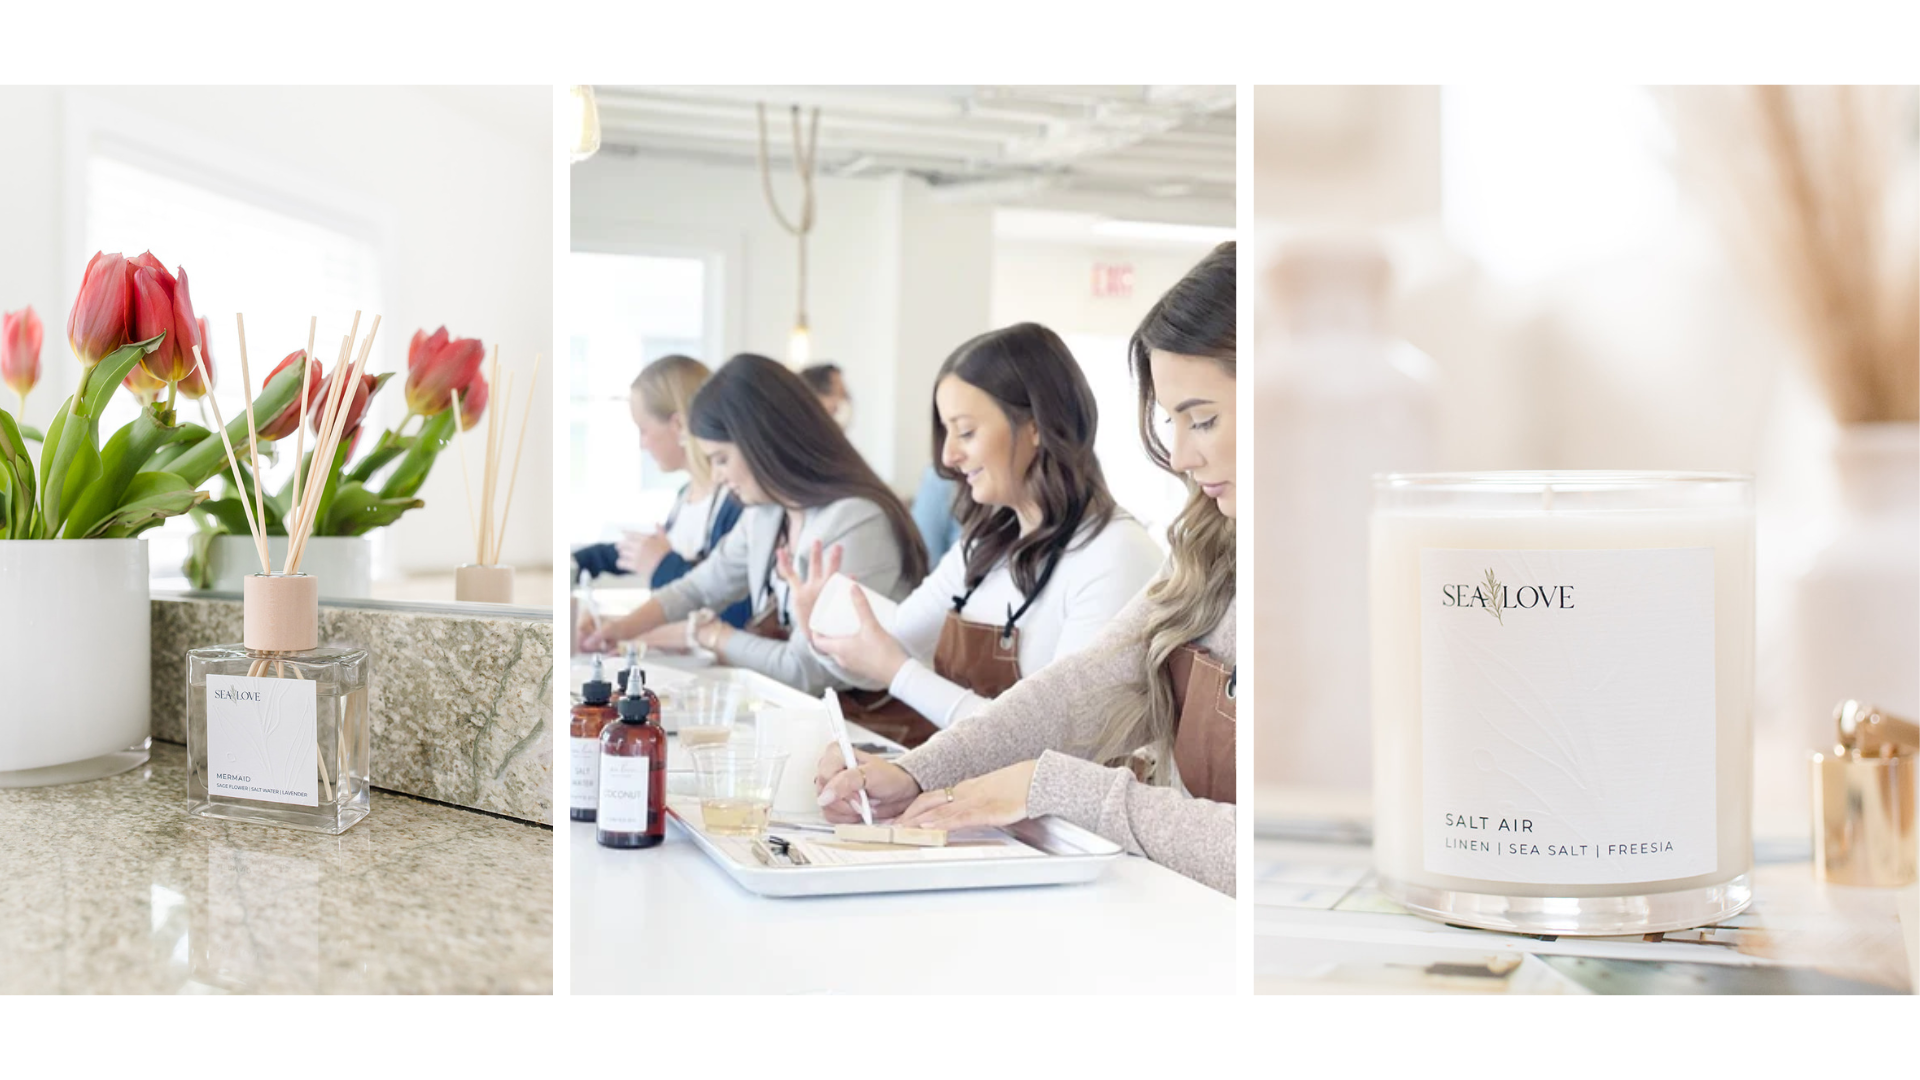 A serene and elegant workspace showcasing a candle-making workshop with participants focused on crafting their homemade candles, flanked by images of fresh tulips and a finished 'sea love' candle, encapsulating a cozy and creative atmosphere.